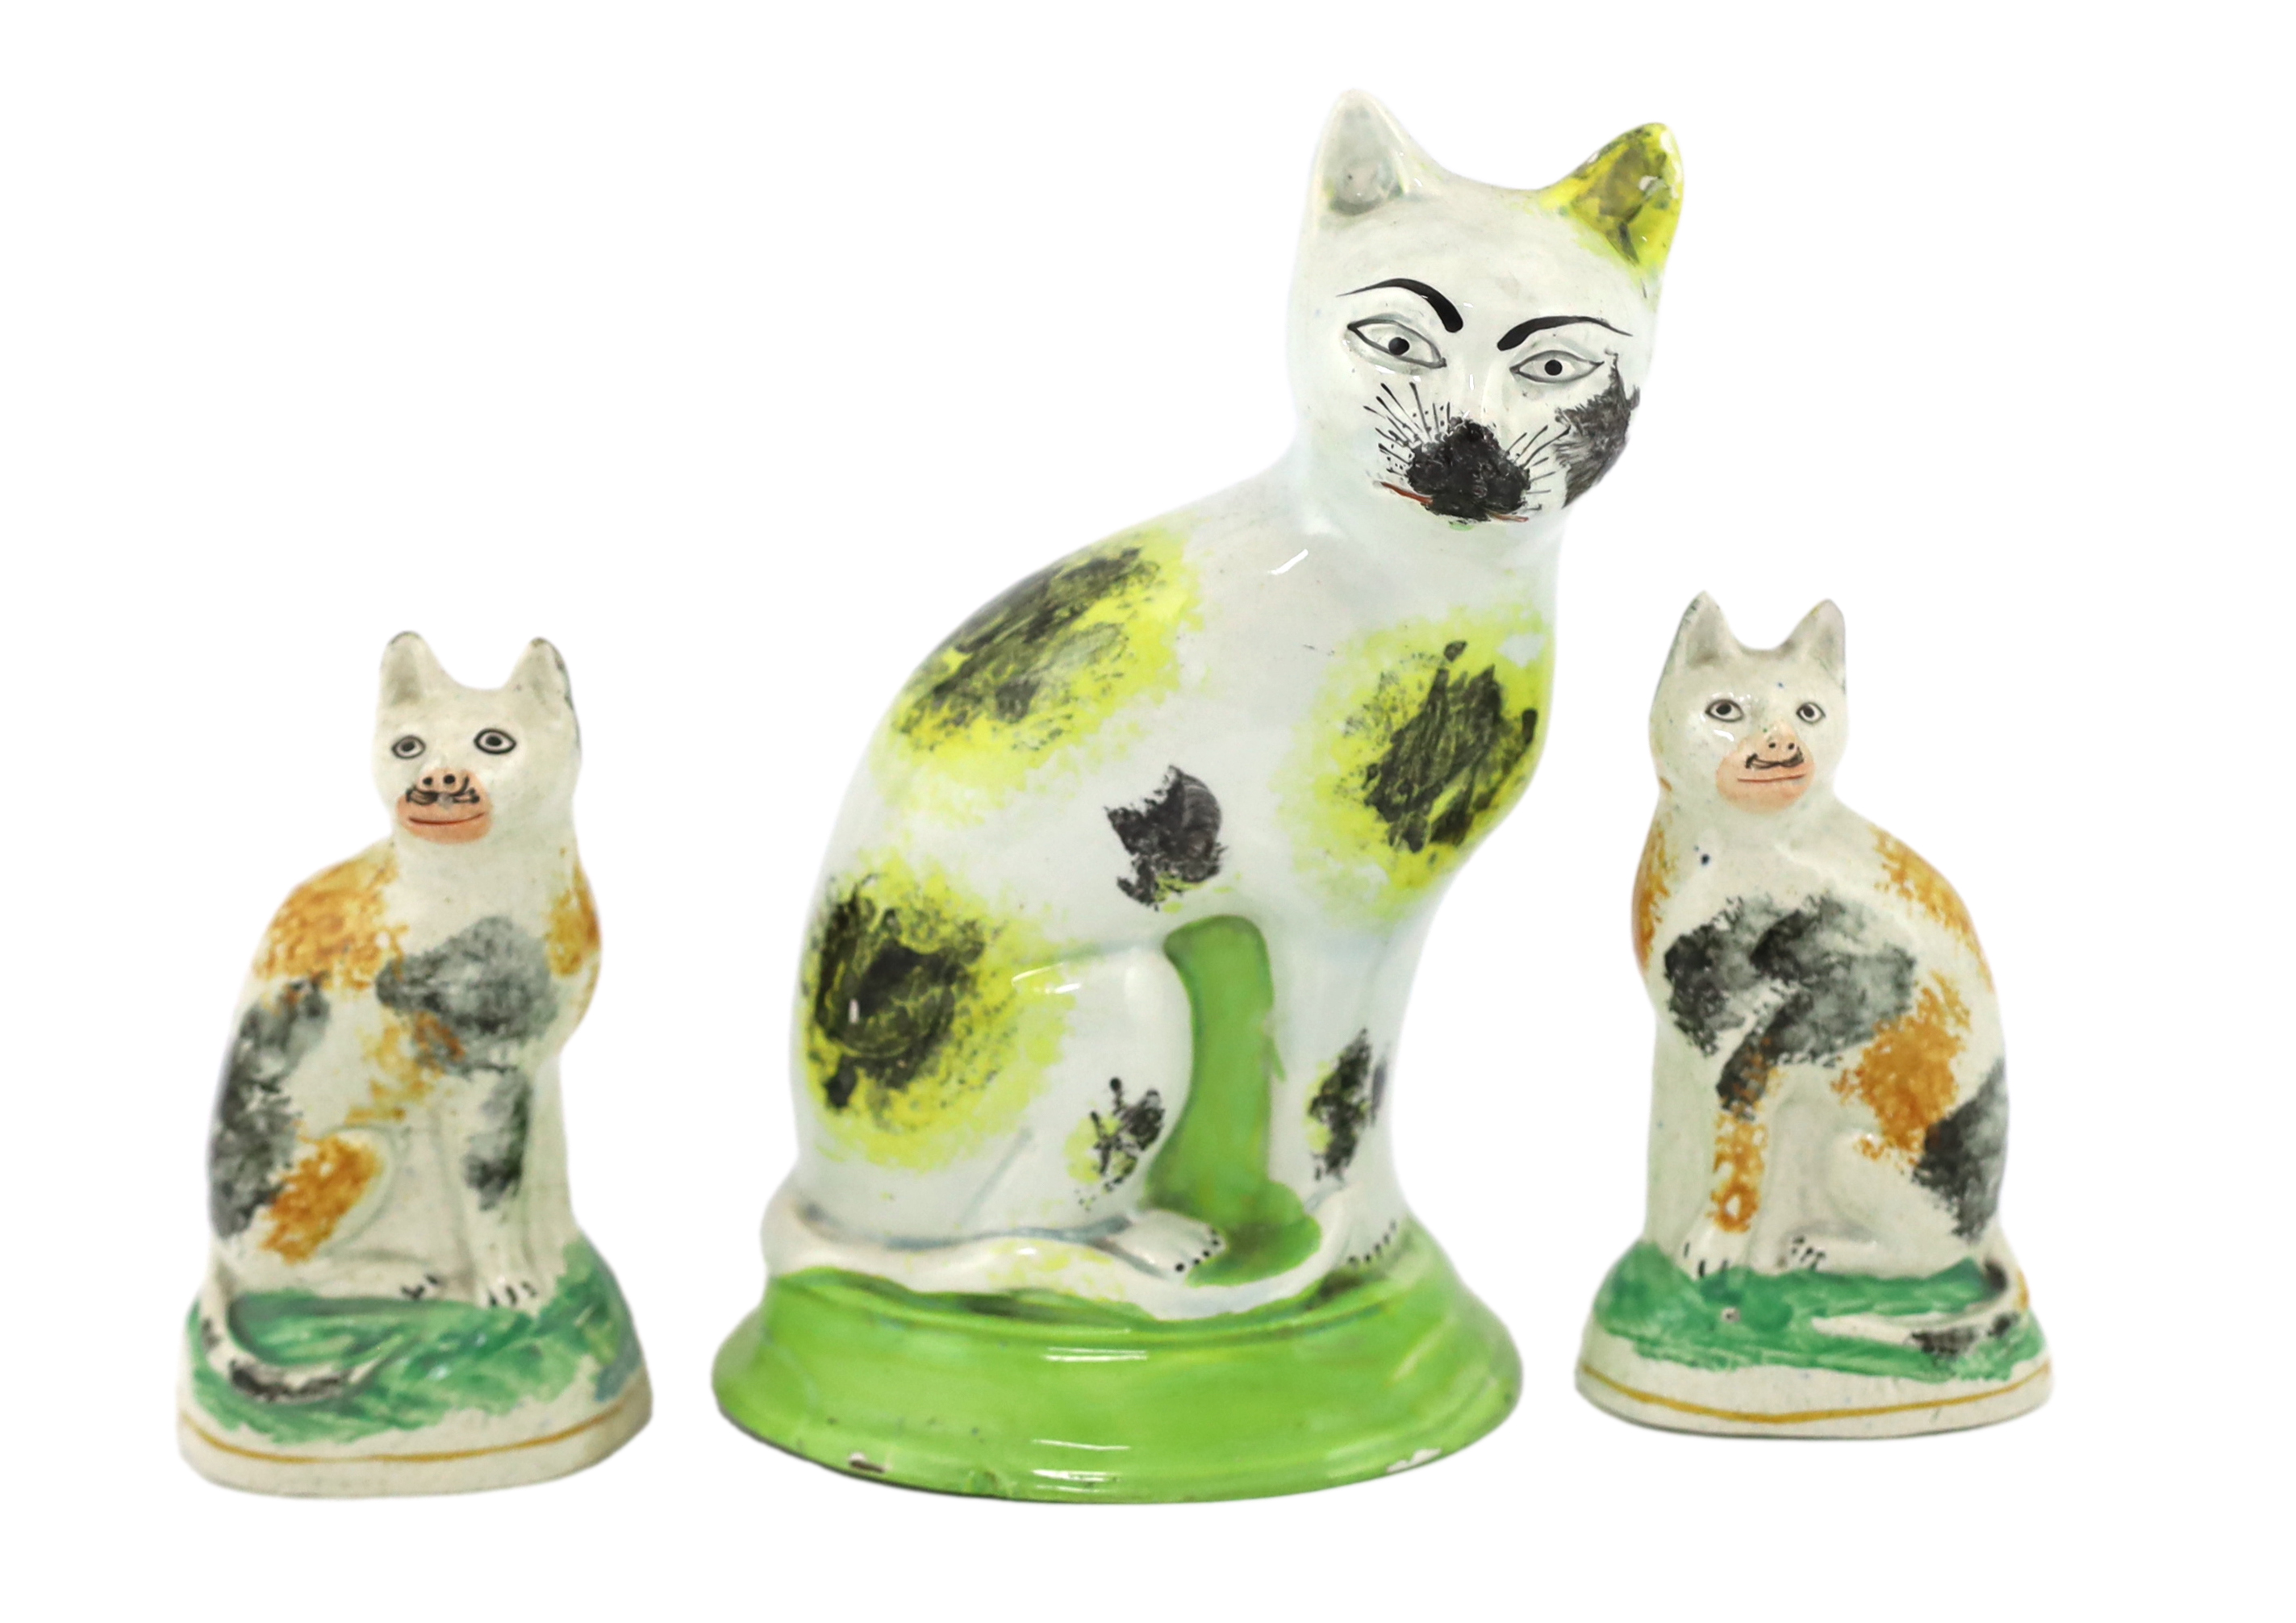 Six Staffordshire pearlware models of cats, early 19th century